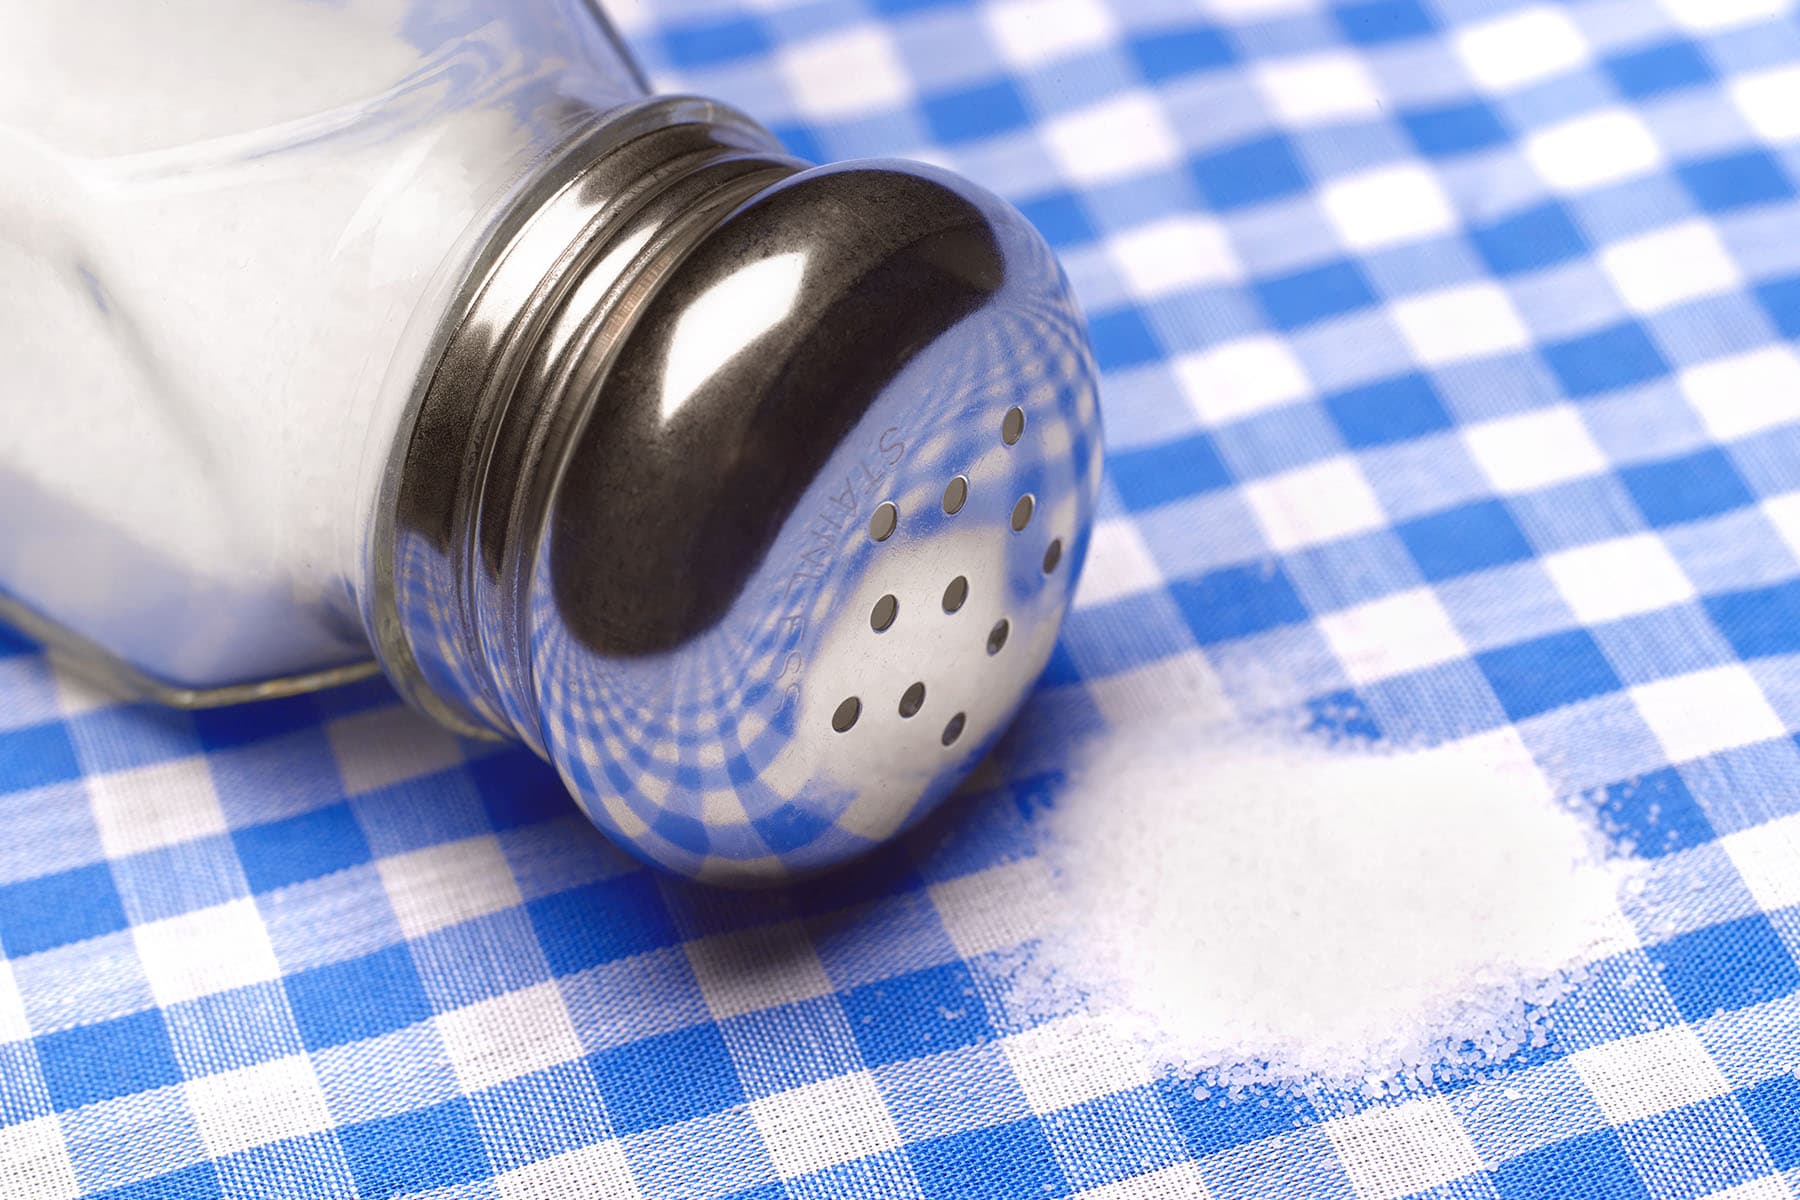 Cutting Table Salt Tied to Lower Heart Disease Risk